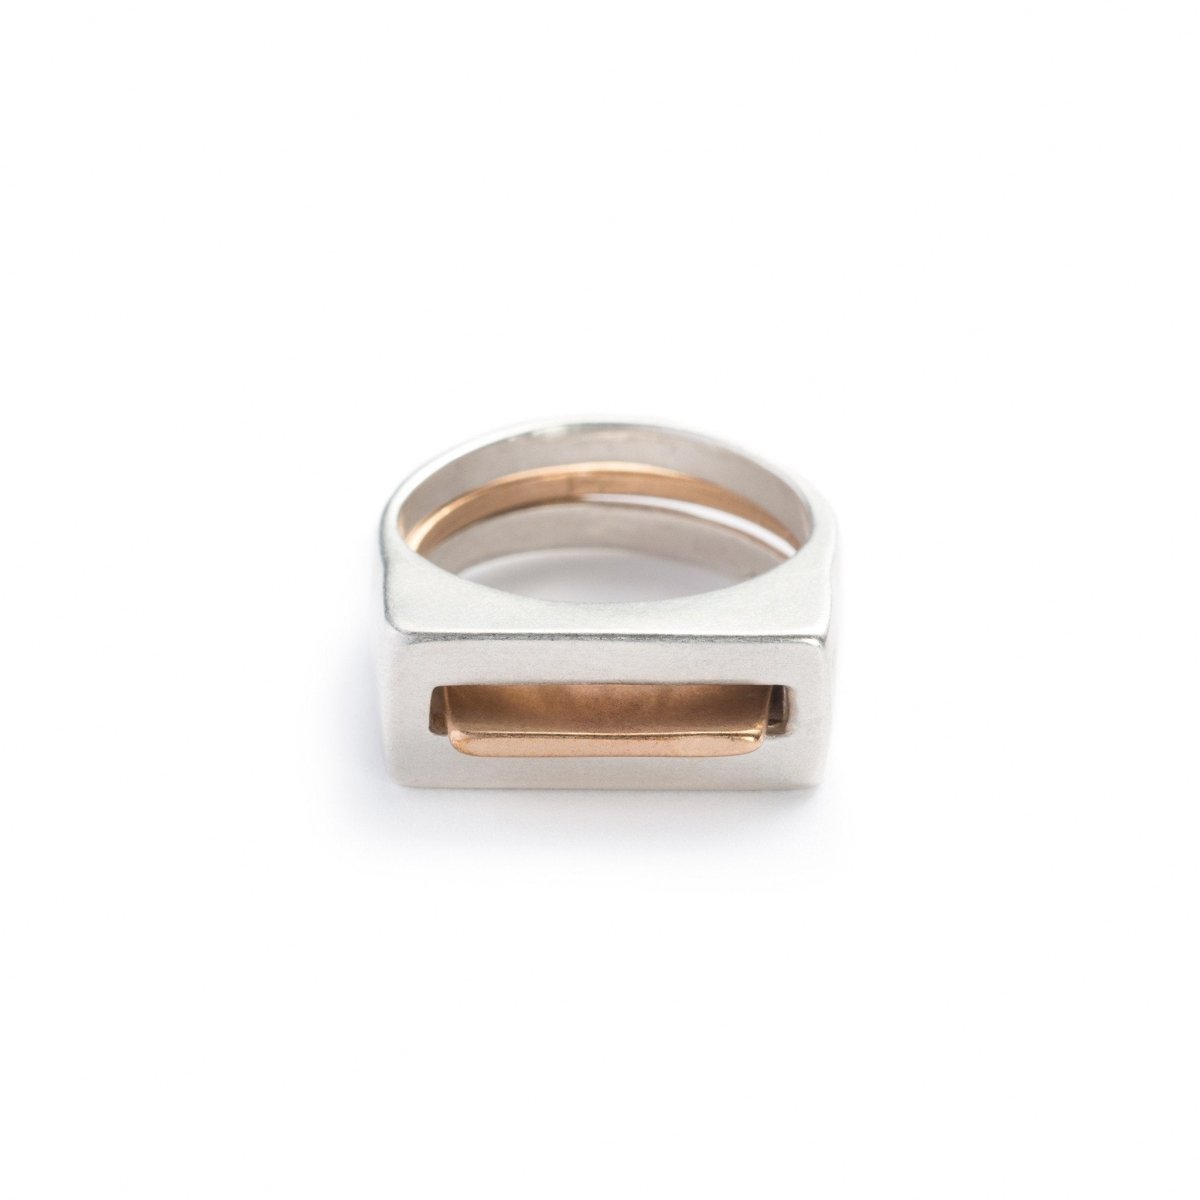 A pair of contemporary rings, featuring one thin, bronze ring with an elongated curve (Tuyo) fitted through a chunky, silver ring with a rectangular cutout (Mía). Hand-crafted in Portland, Oregon. 